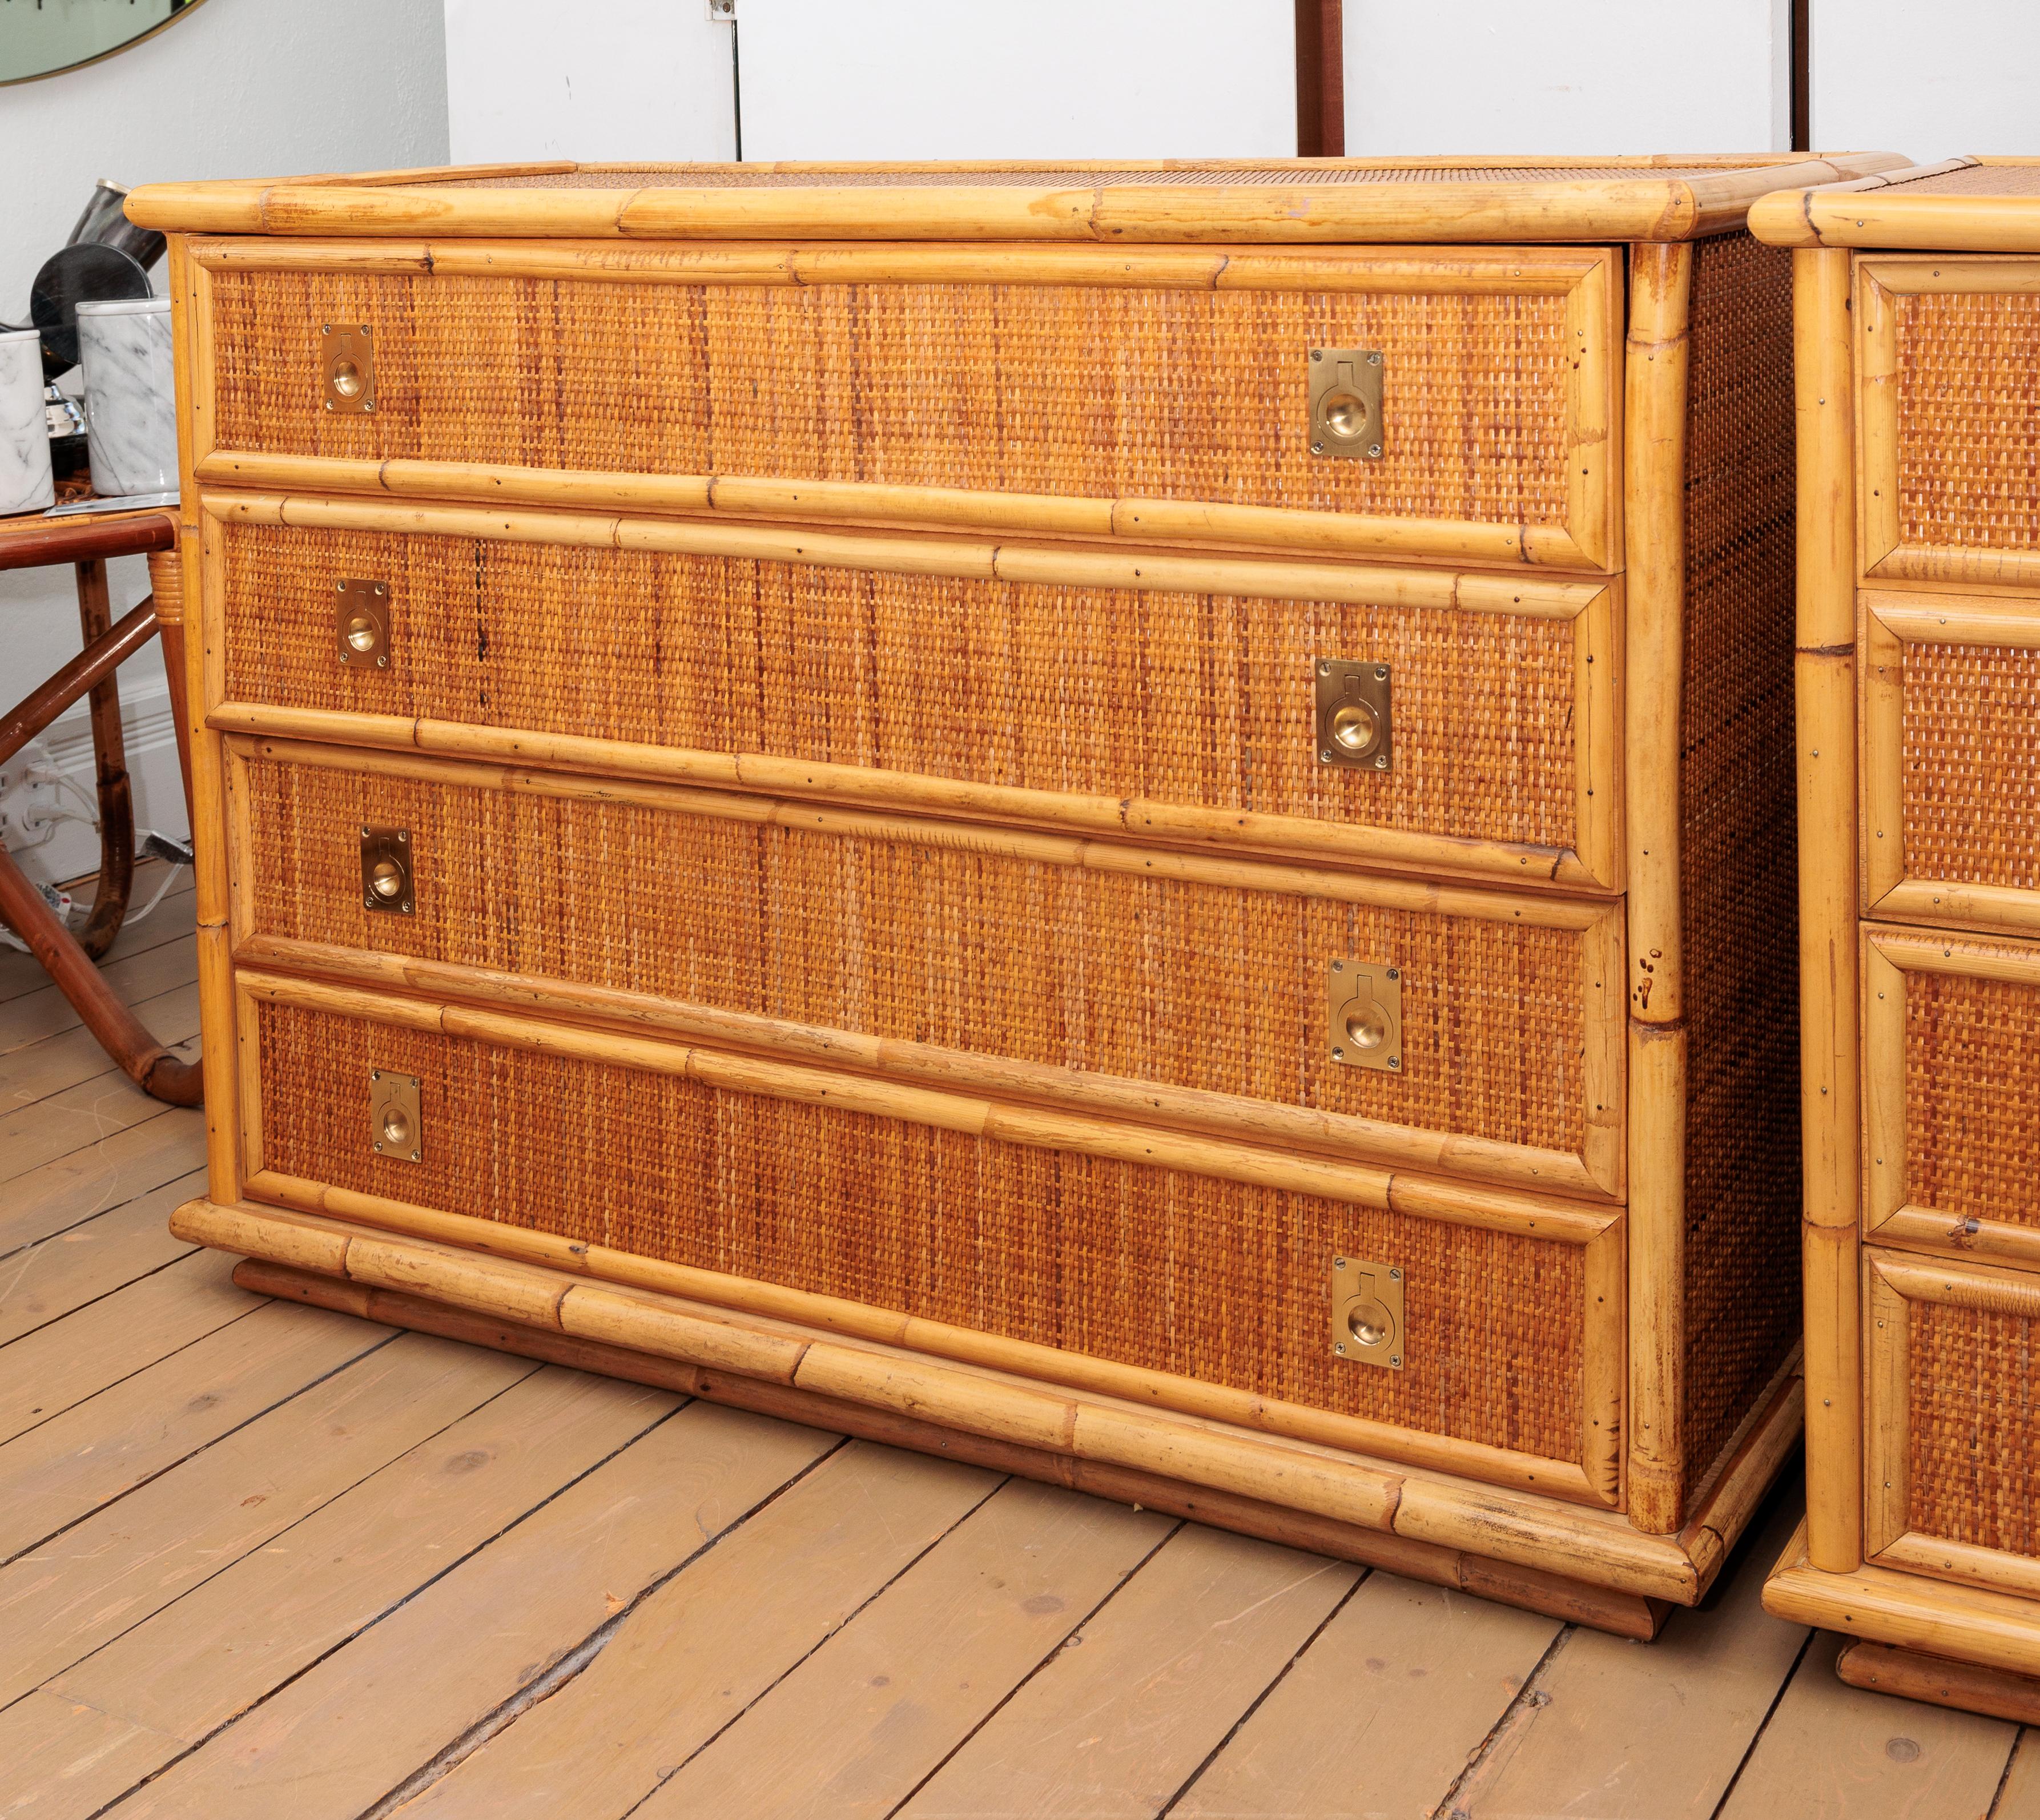 The chest is a multi-functional piece. Will fit with any form of decor, in any room.